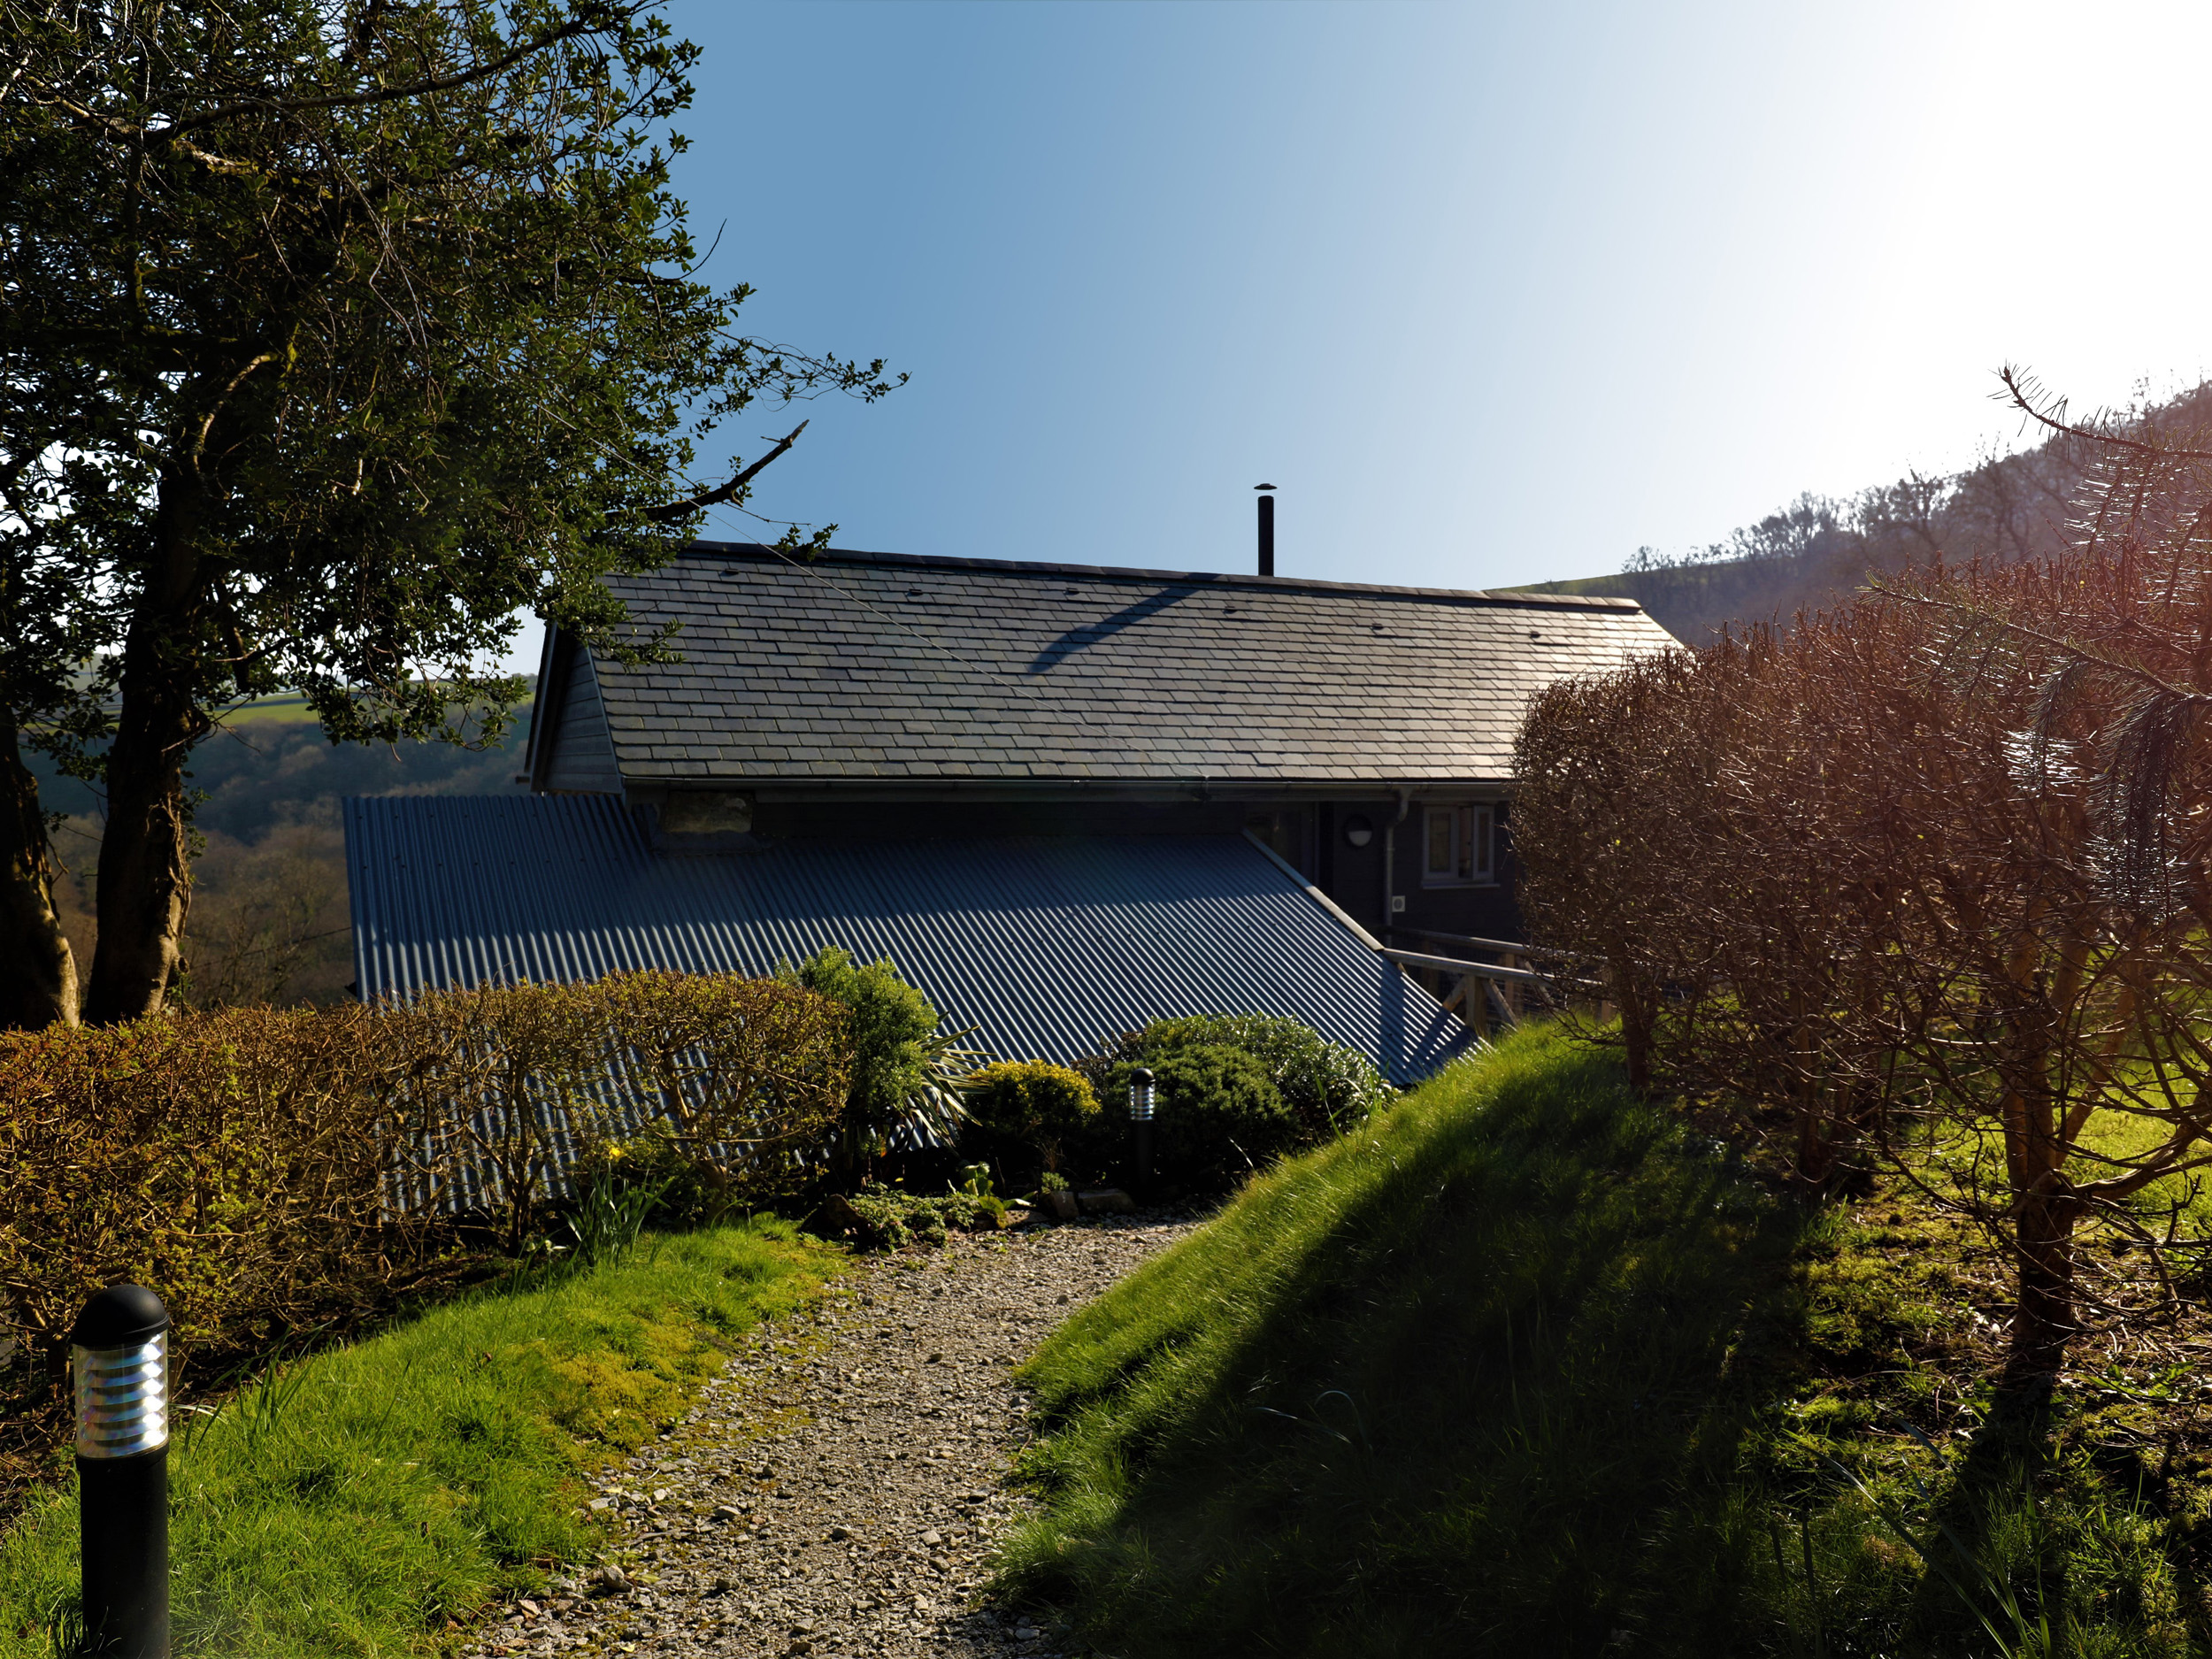 2 bedroom Cottage for rent in Combe Martin